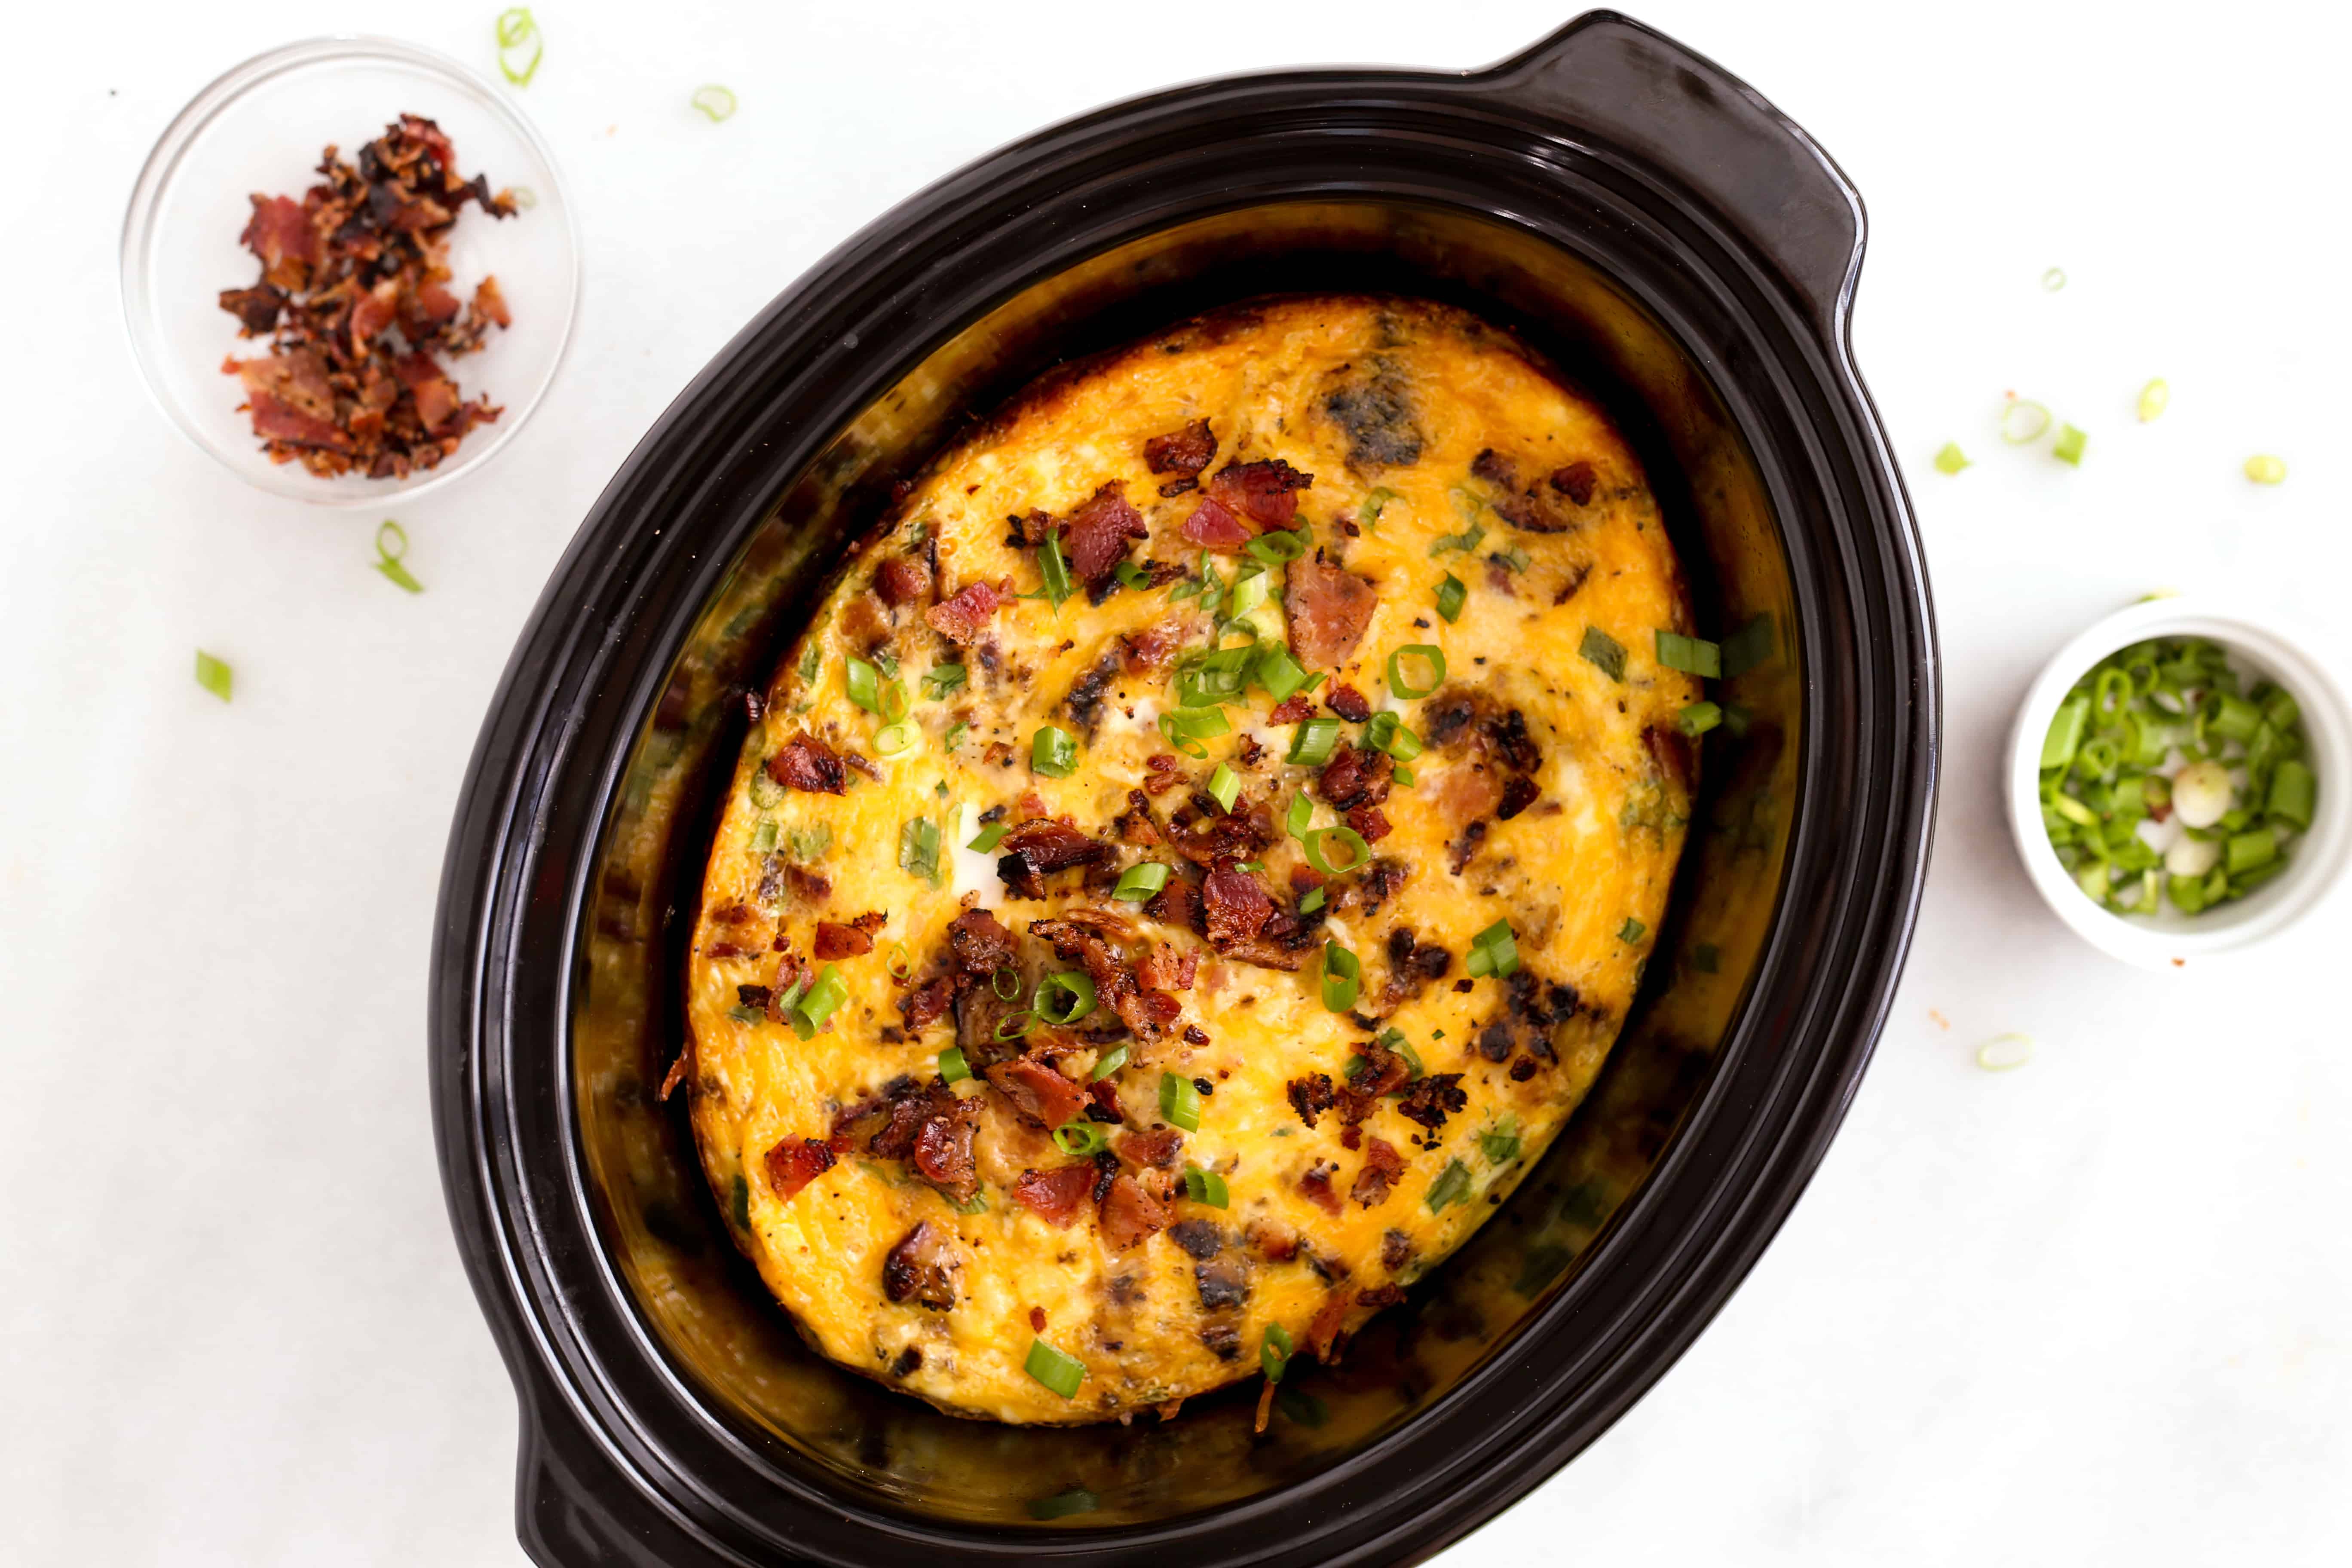 slow-cooker-bacon-egg-hashbrown-casserole-2